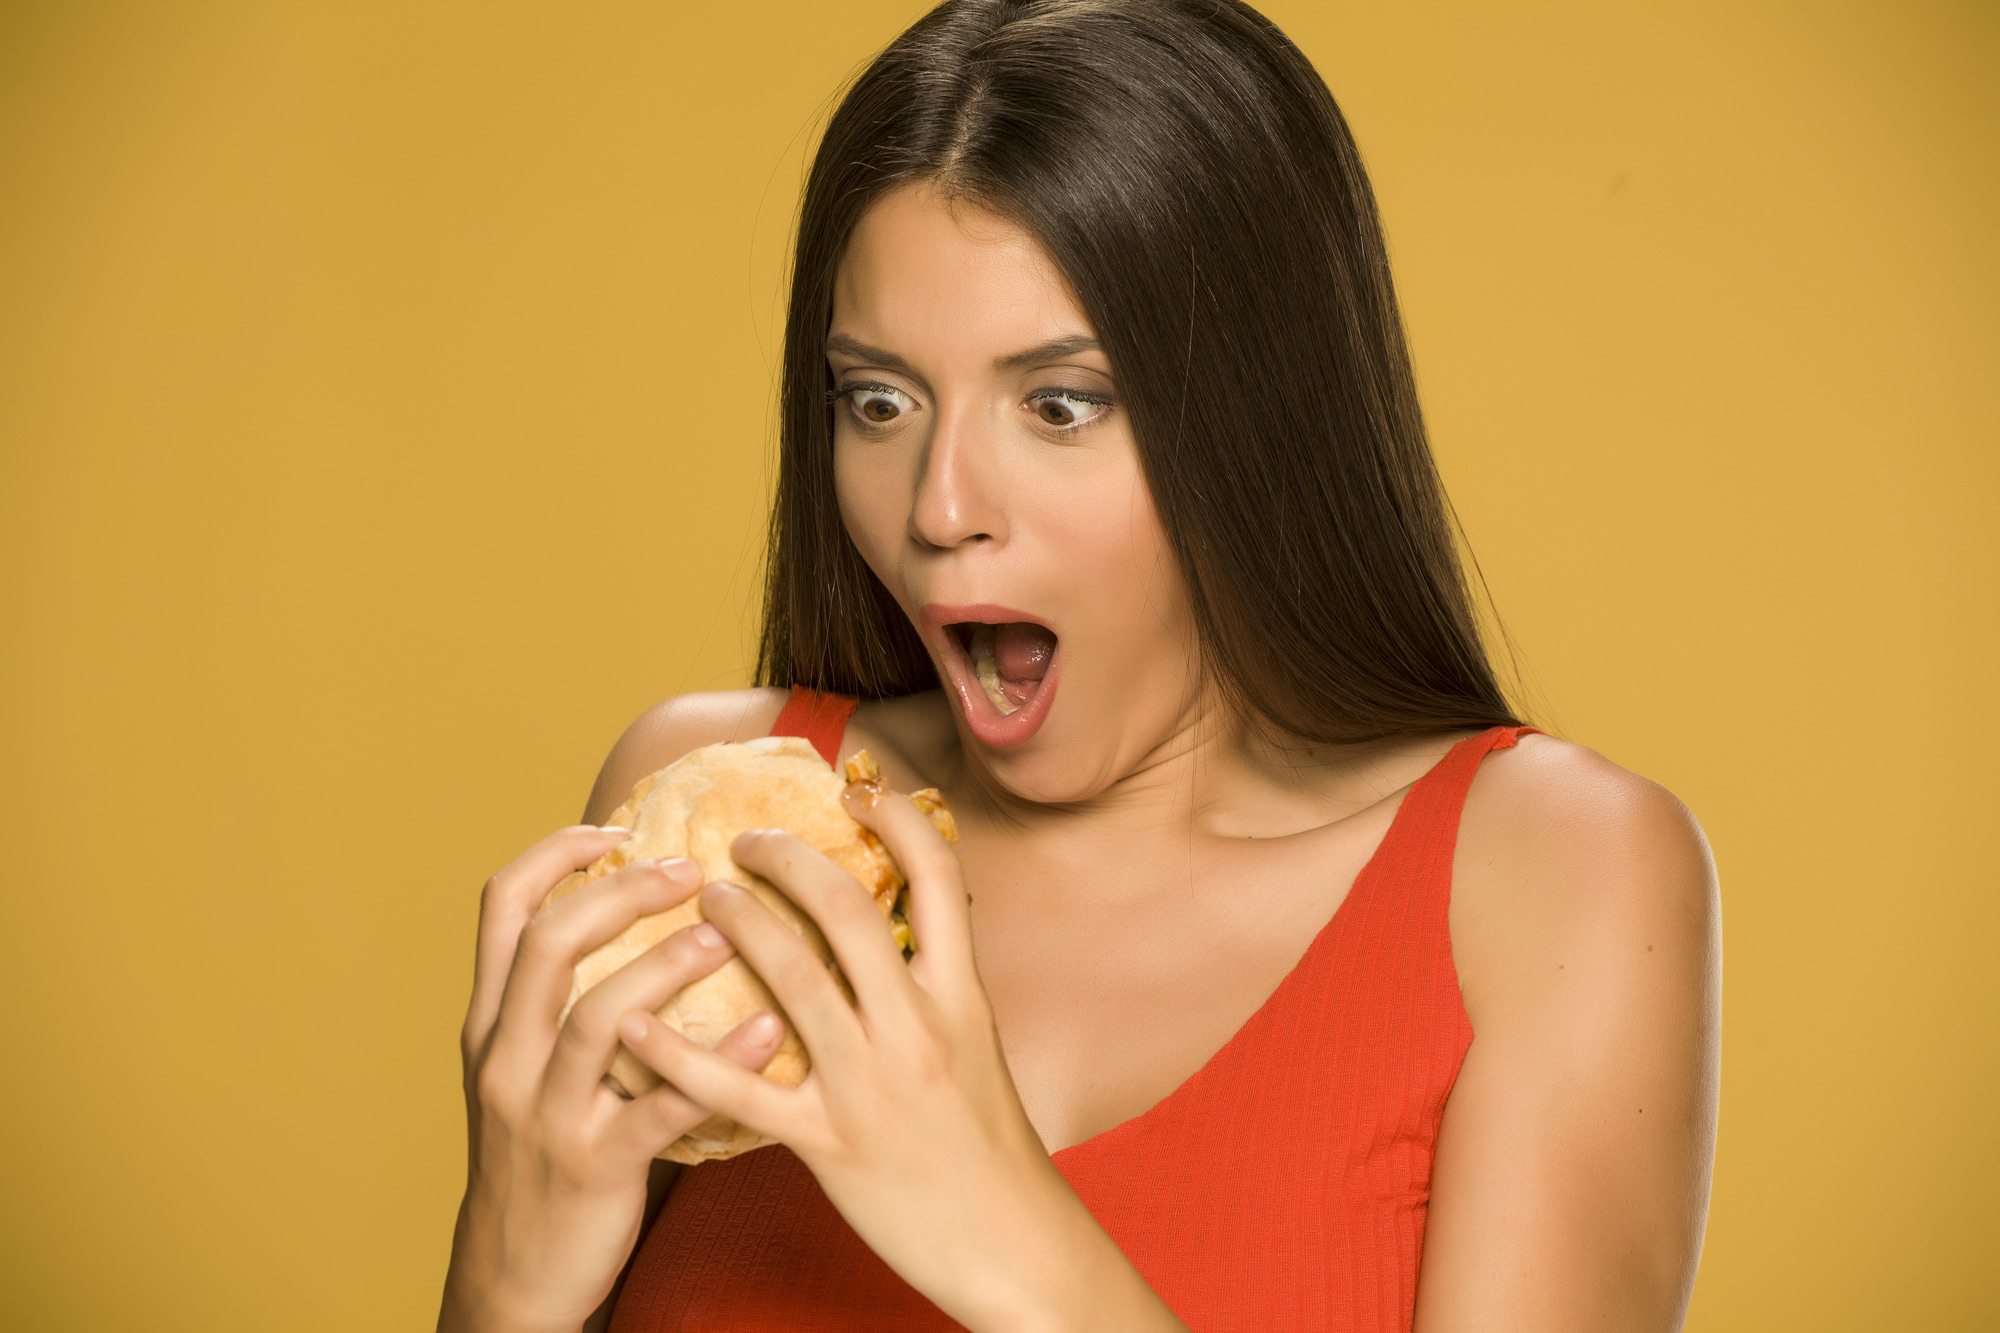 Young greedy woman eating a burger on yellow background